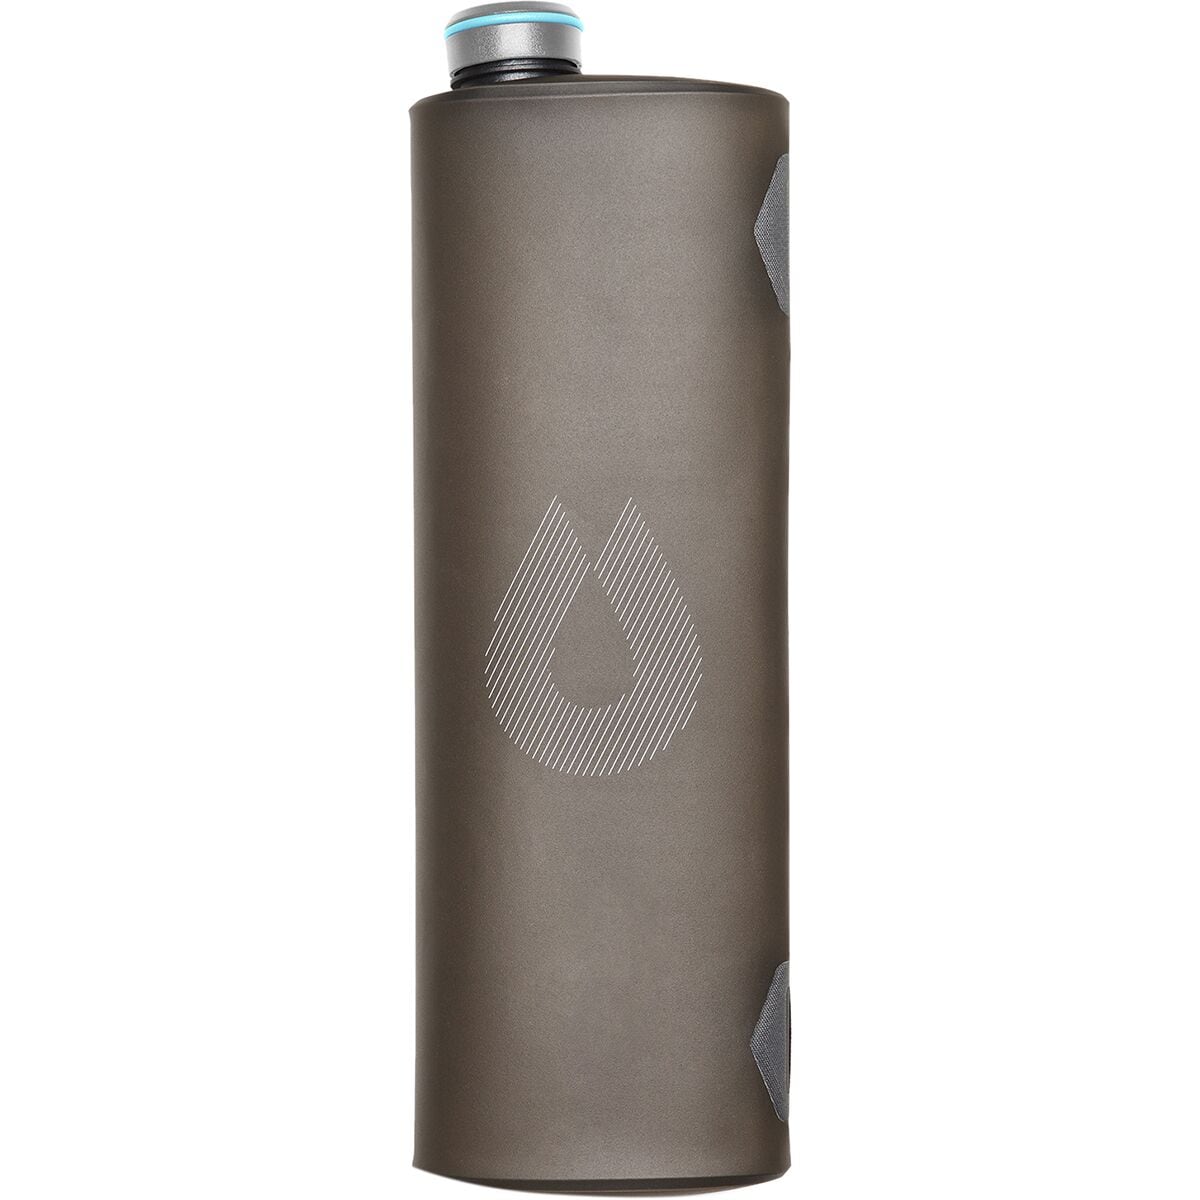 Photos - Other goods for tourism Hydrapak Seeker 3L Water Bottle 